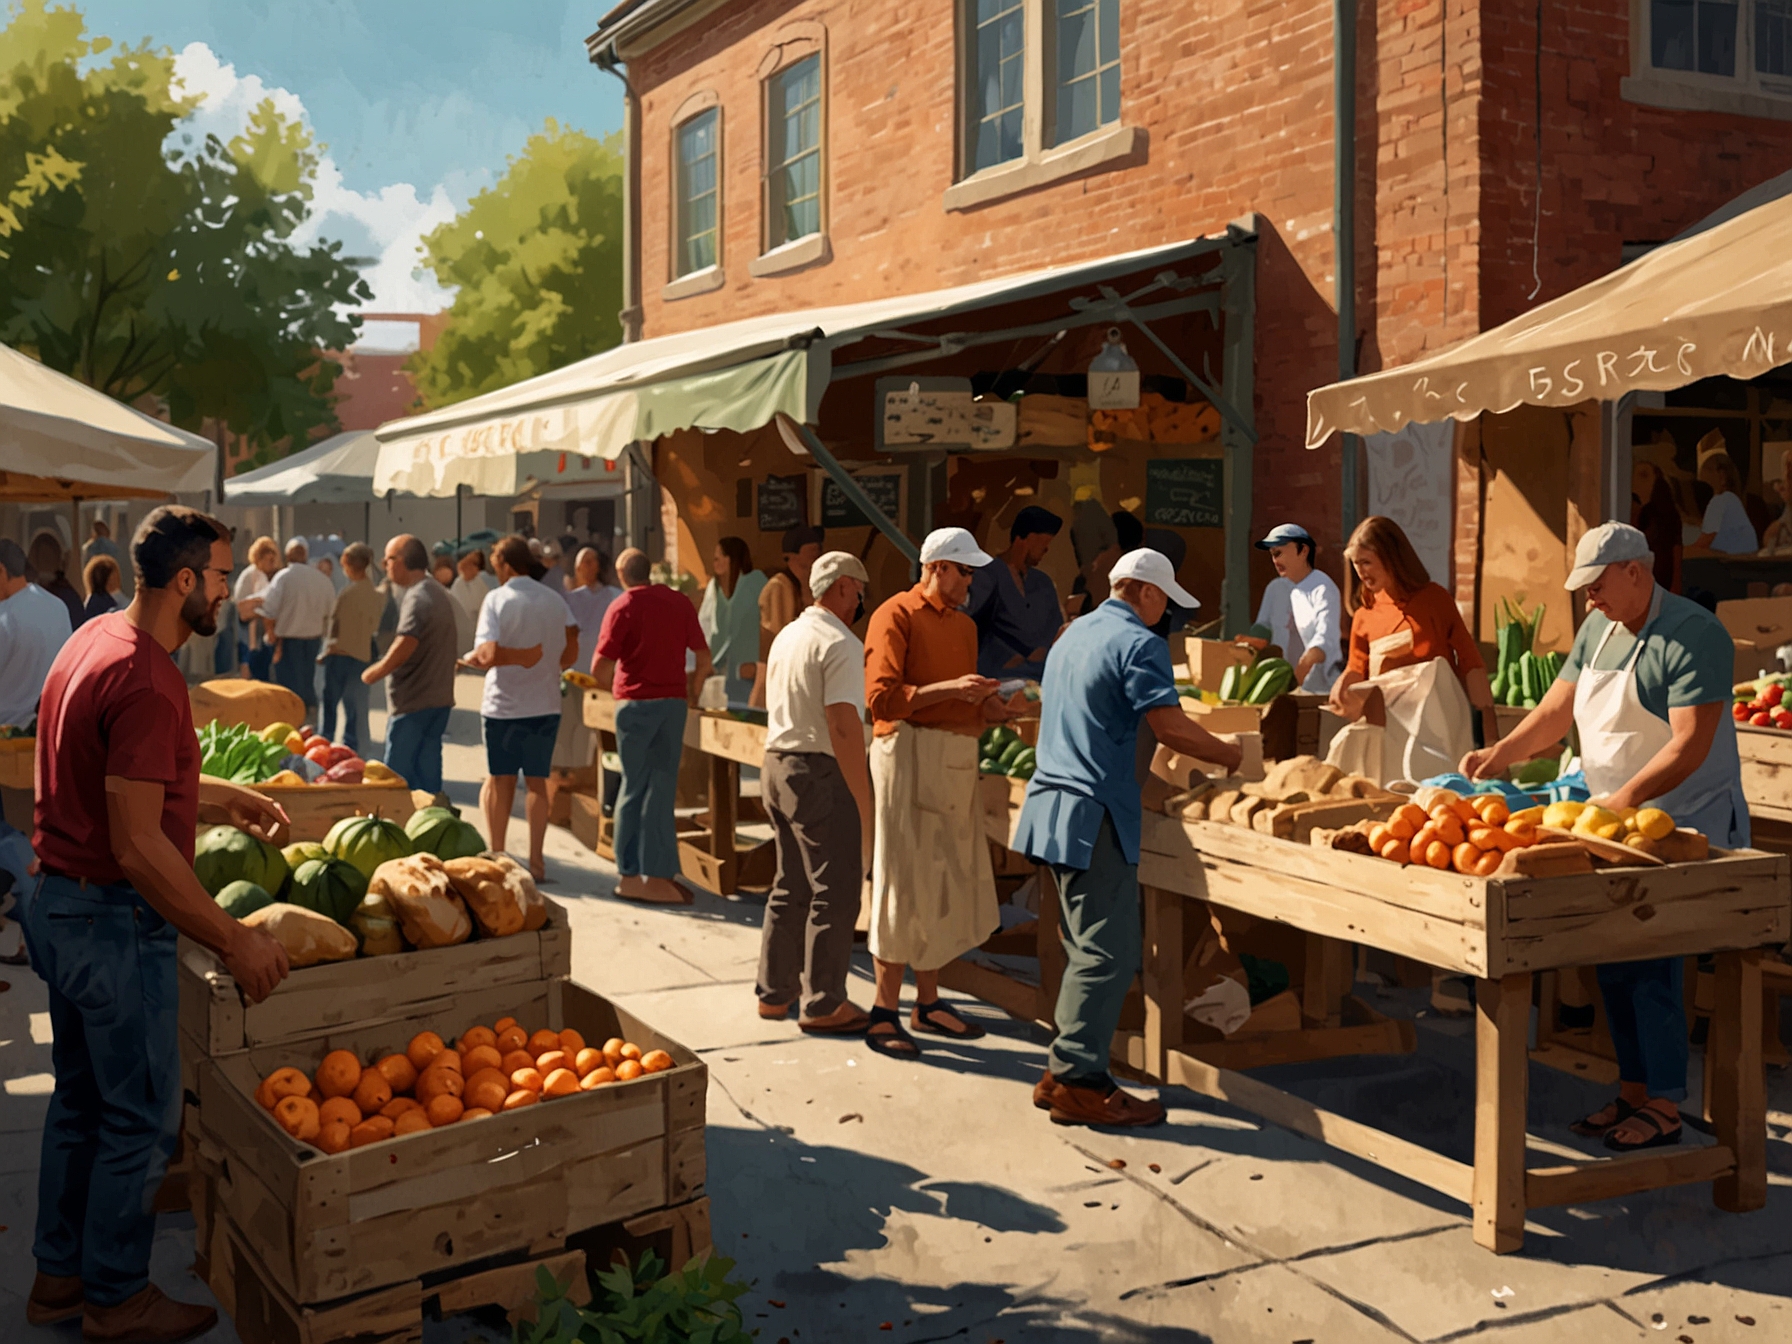 A lively scene at the local Farmer's Market with people buying fresh produce, artisan bread, and handmade crafts. A cooking demonstration and live music in the background add to the vibrant atmosphere.